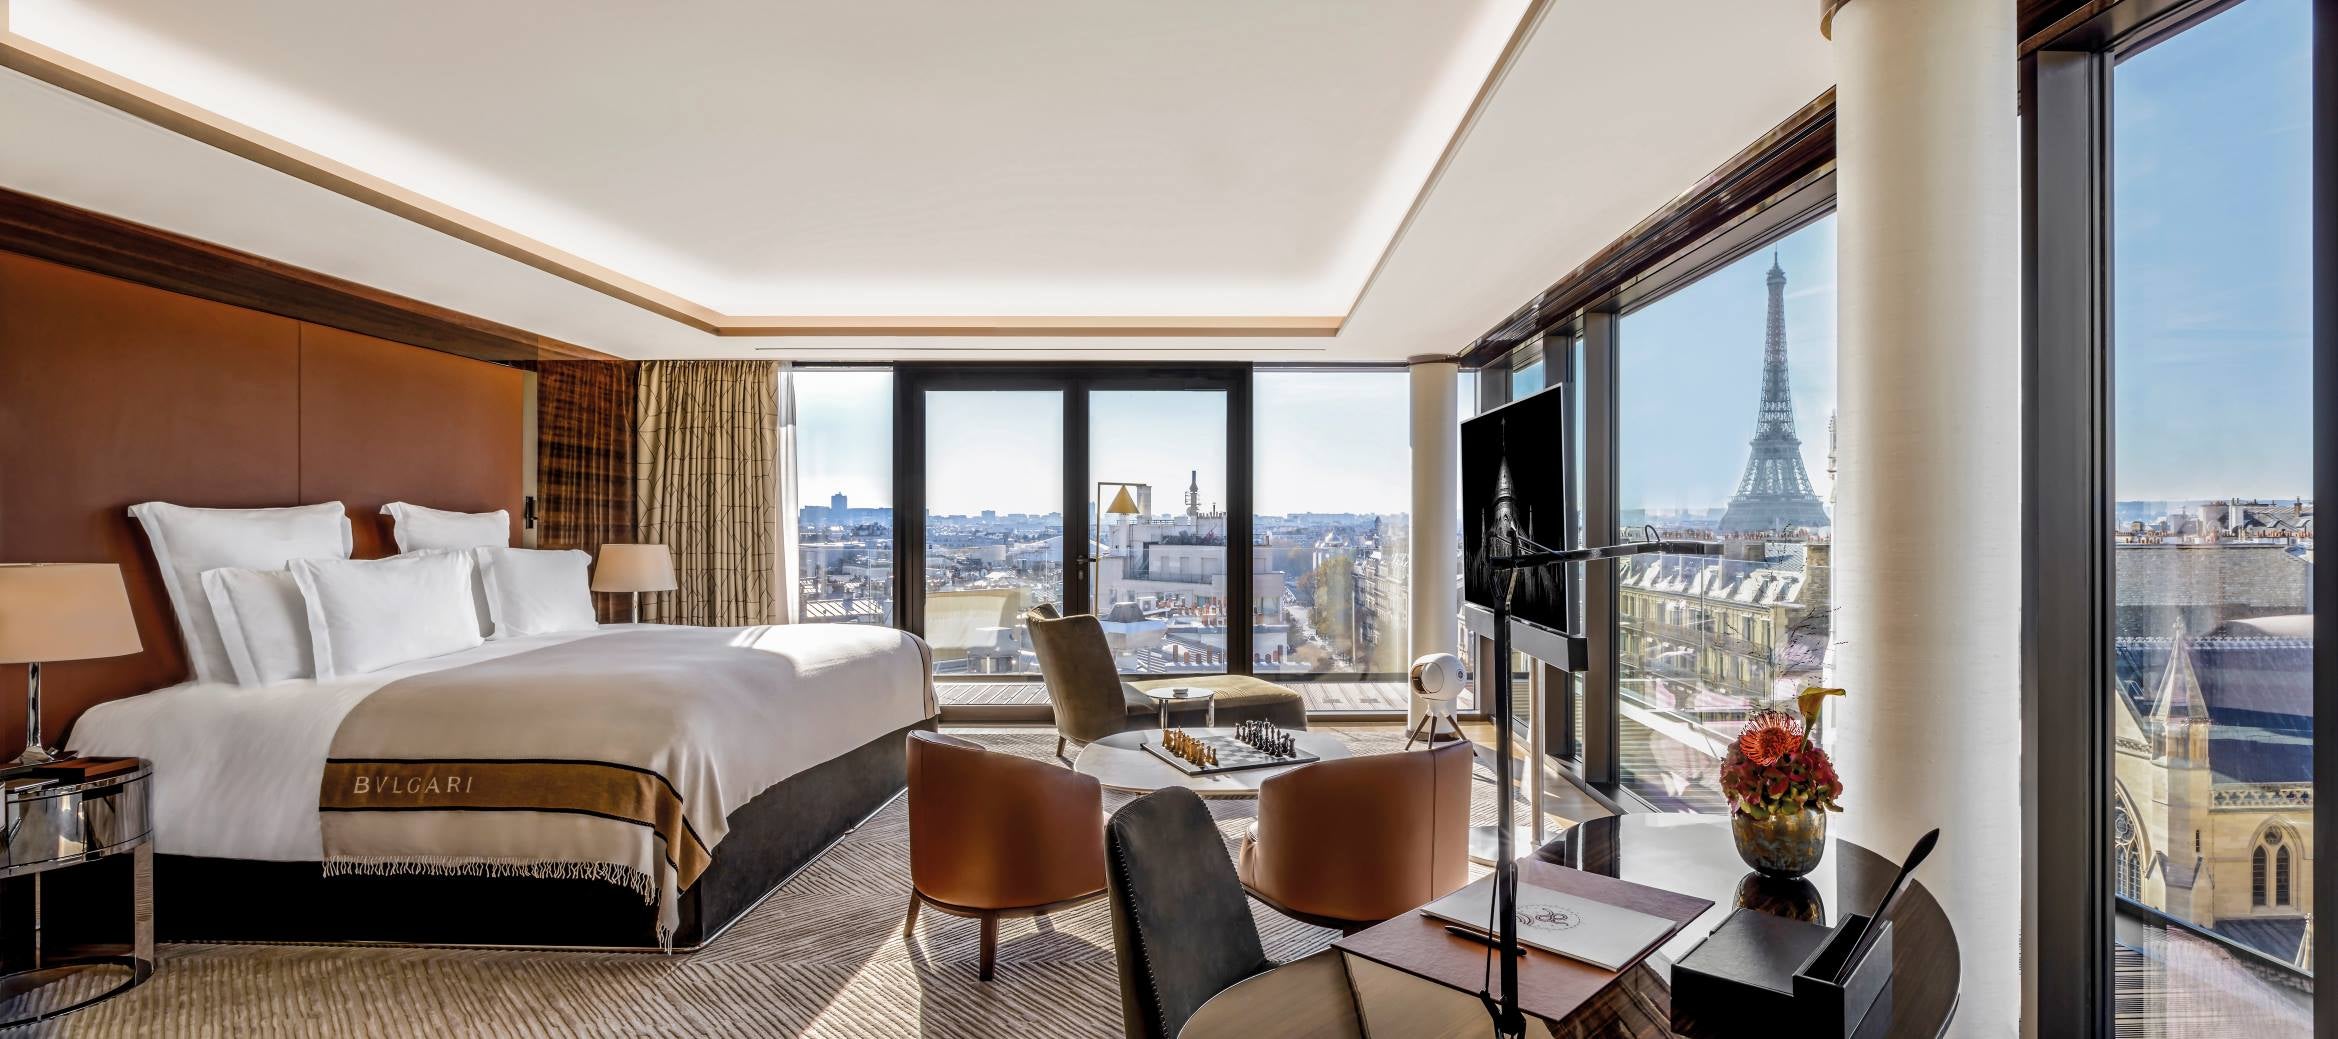 Image showing the sweeping view from the penthouse of Bulgari Hotel